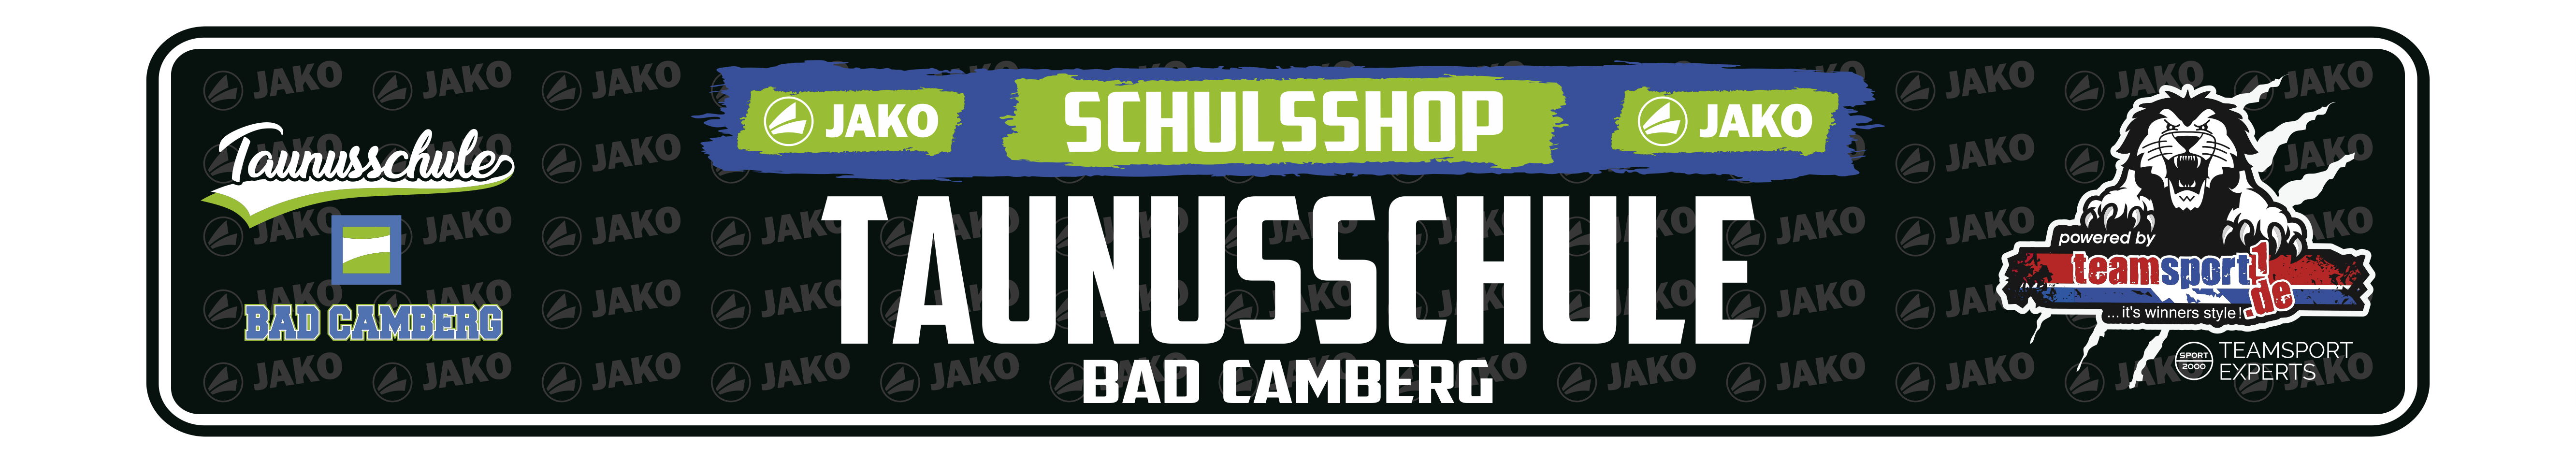 Taunusschule Bad Camberg Title Image